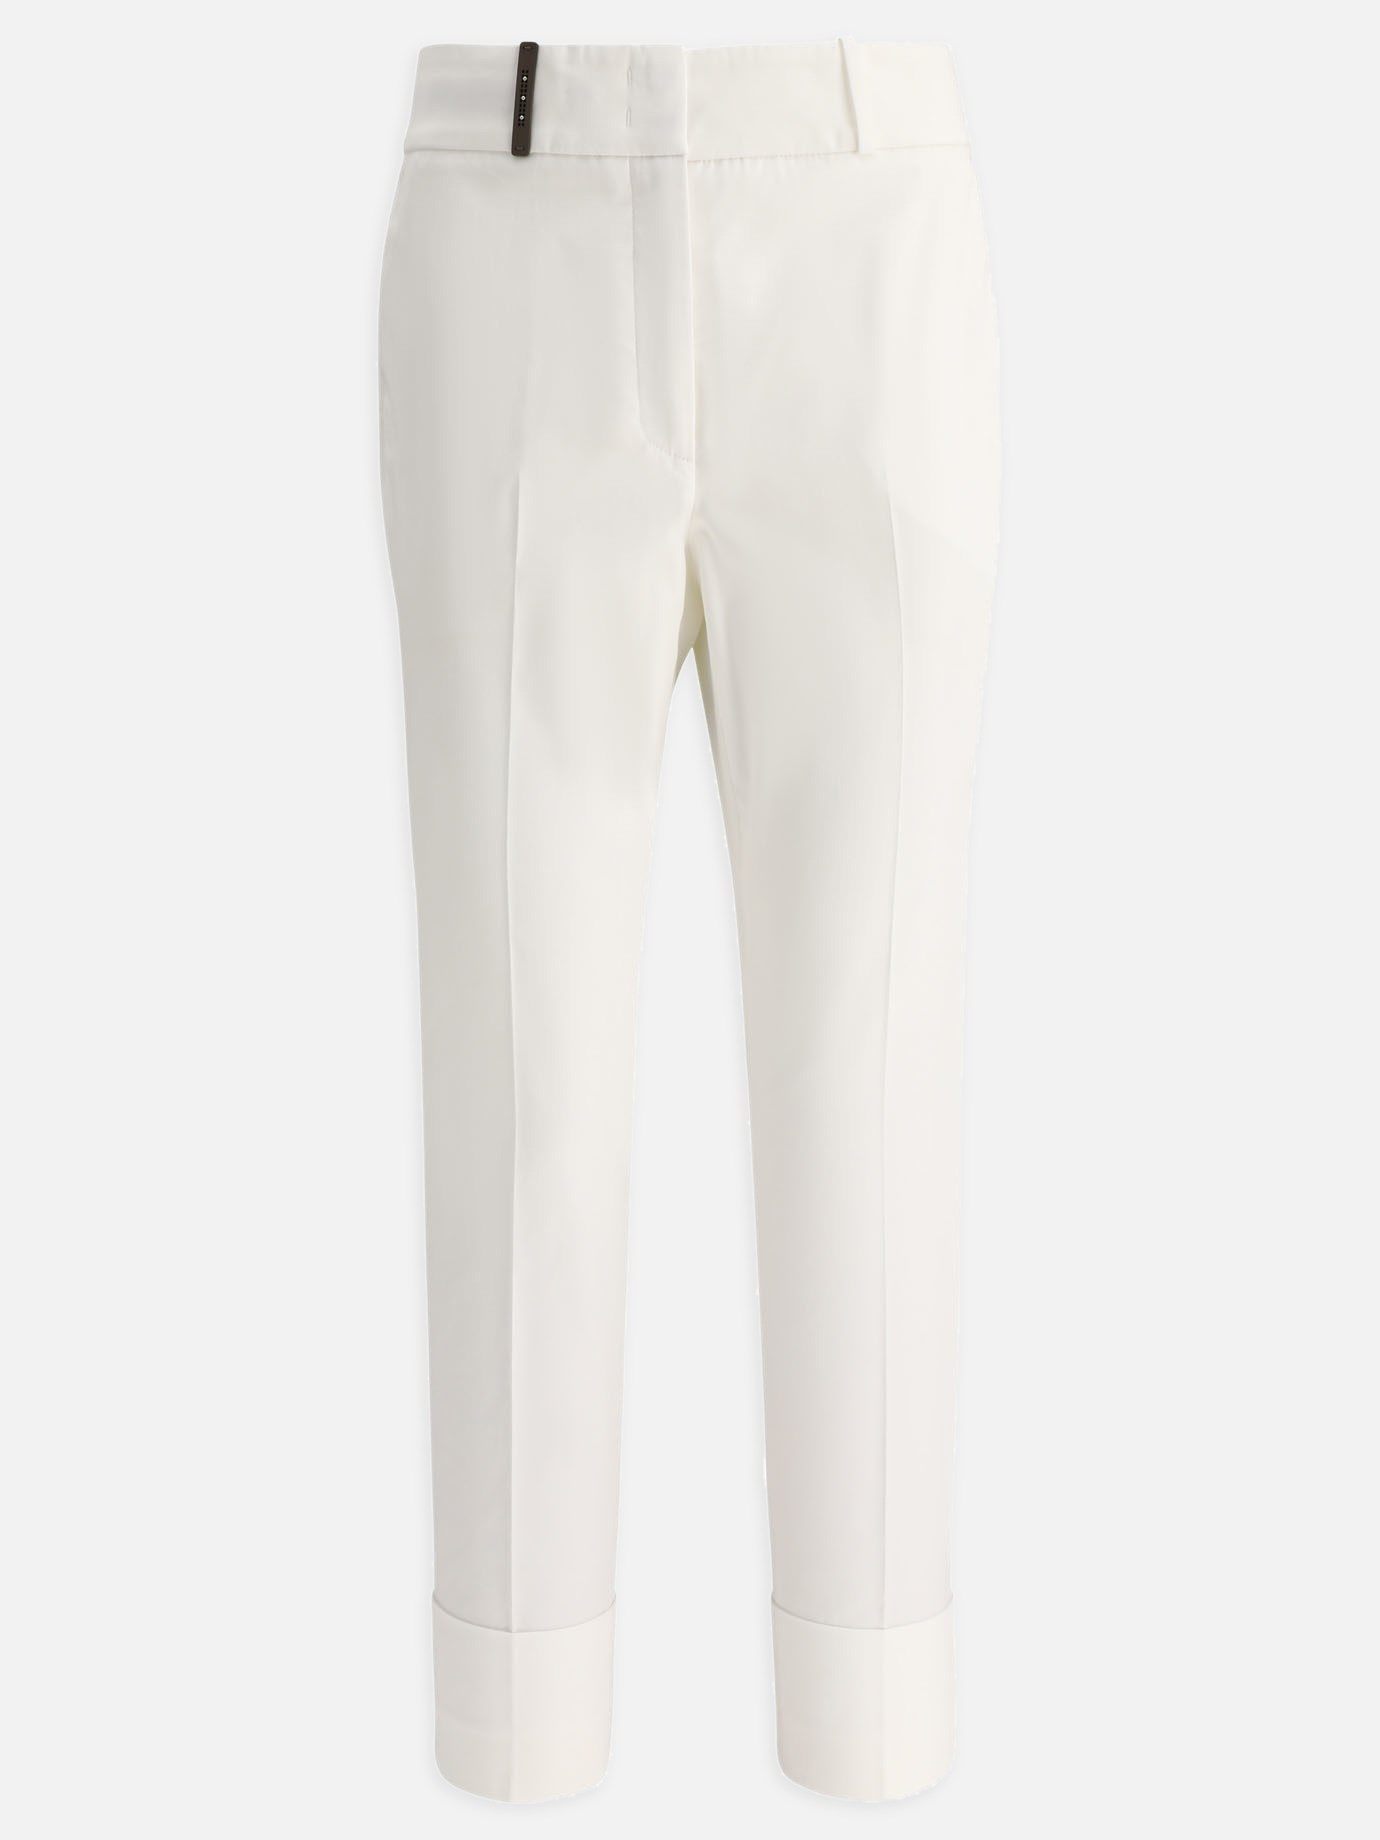 Trousers with high turn-up hem